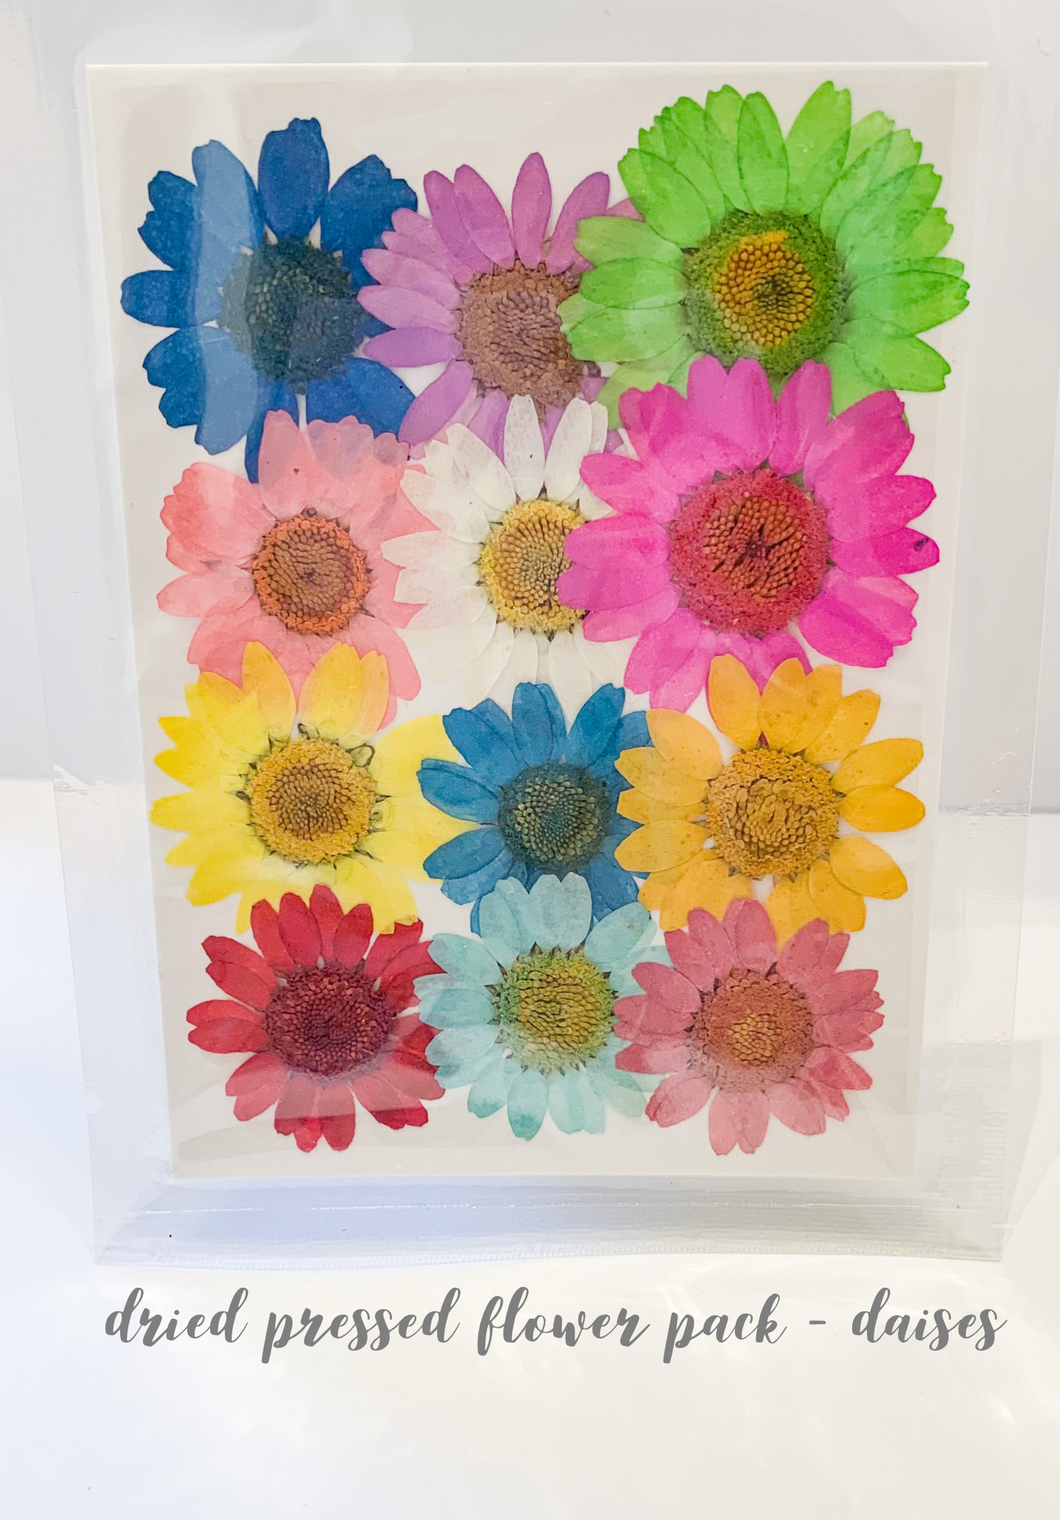 Small Dried Pressed Flower Pack - Daisies